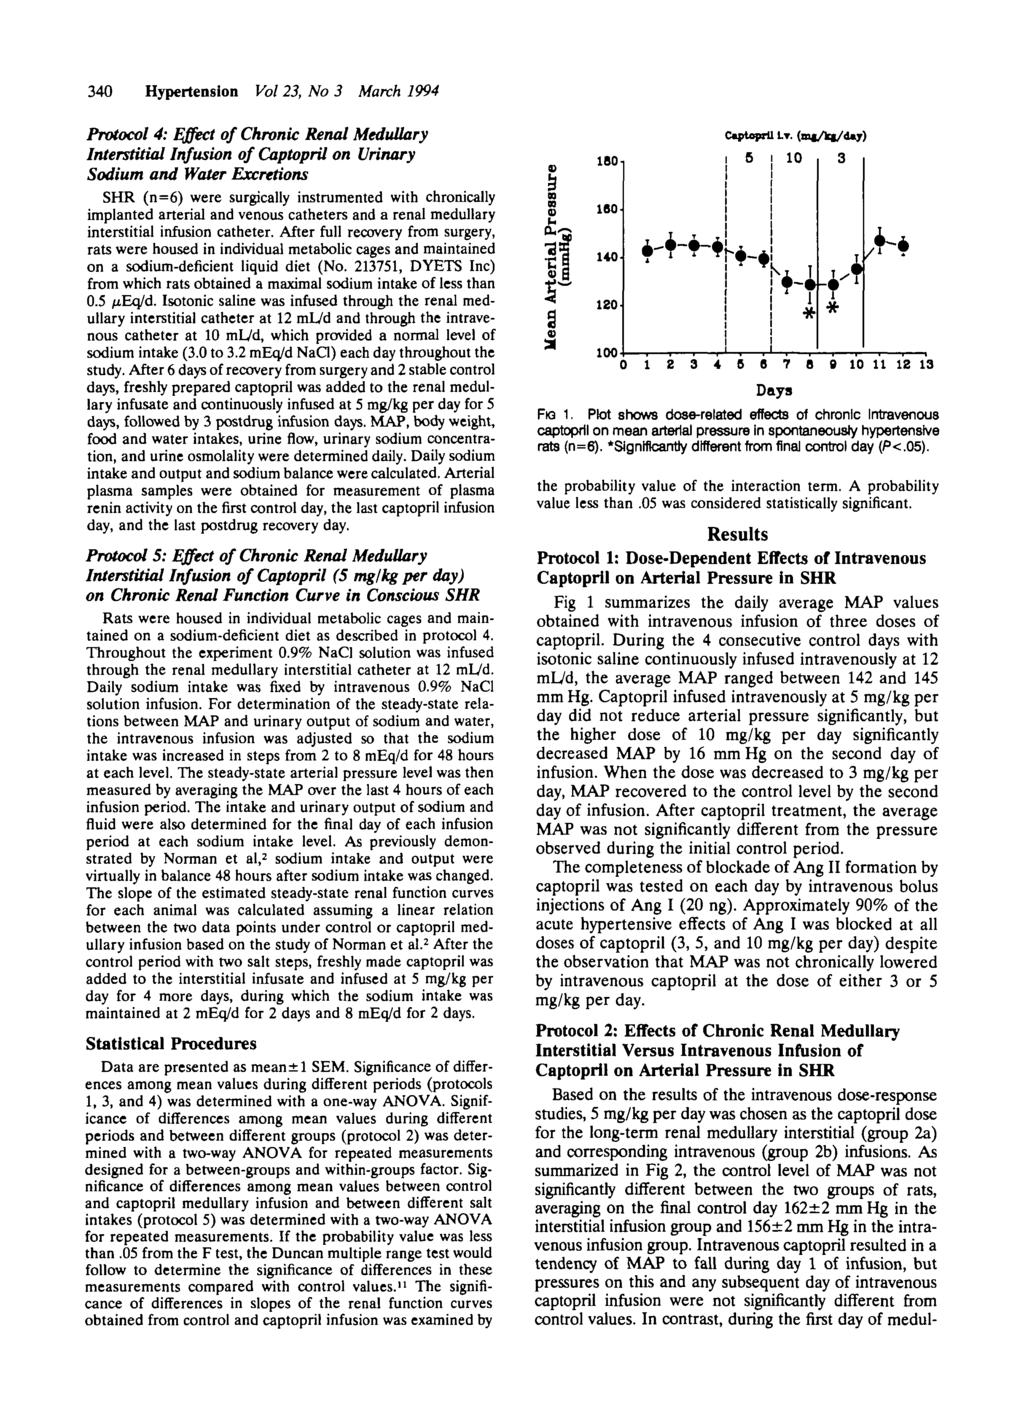 340 Hypertension Vol 23, No 3 March 1994 Protocol 2: Effects of Chronic Renal Medullary Interstitial Versus Intravenous Infusion of Captopril on Arterial Pressure in SHR Based on the results of the